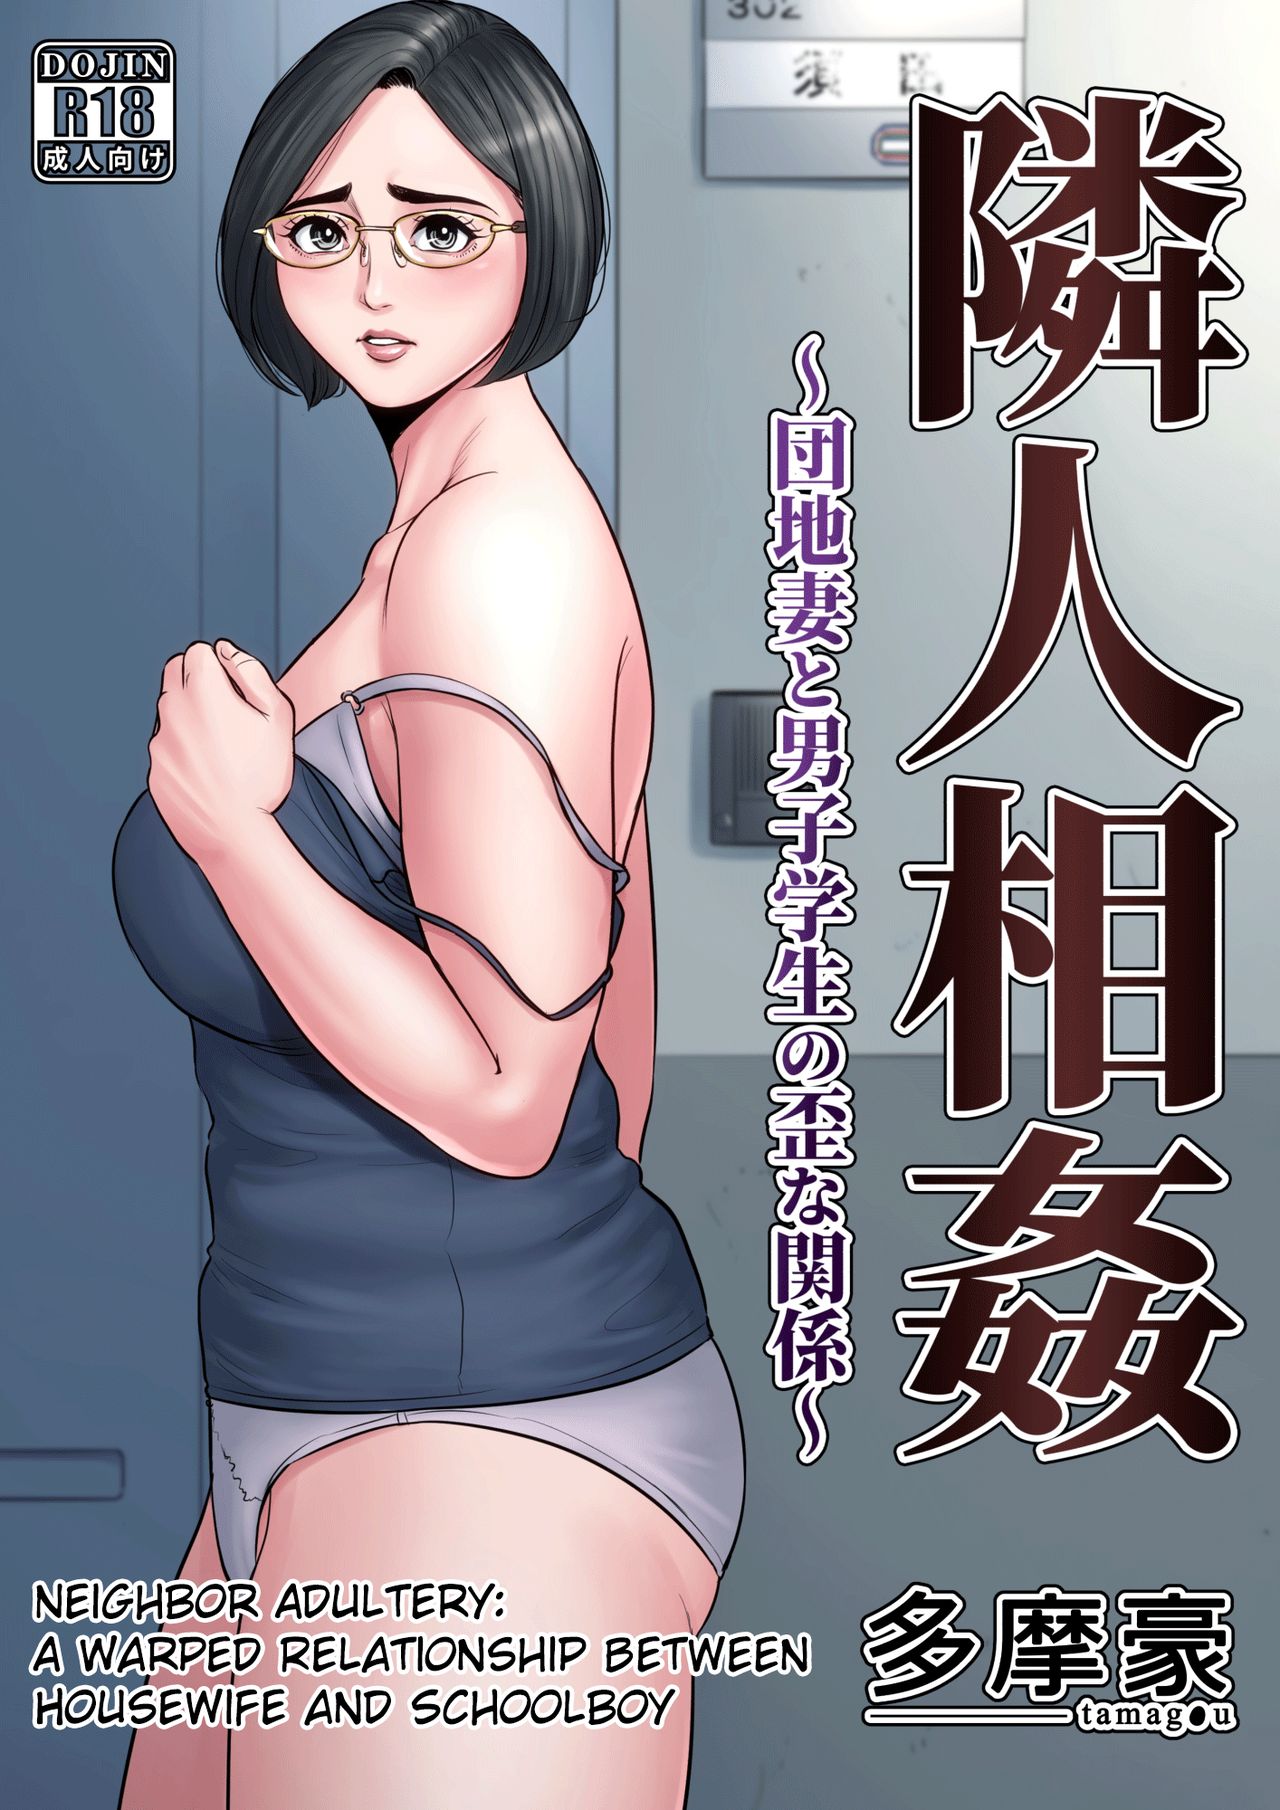 1 . Neighbor Adultery  - A Warped Relationship Between Housewife and Schoolboy Chapter 1 [Tamagou]